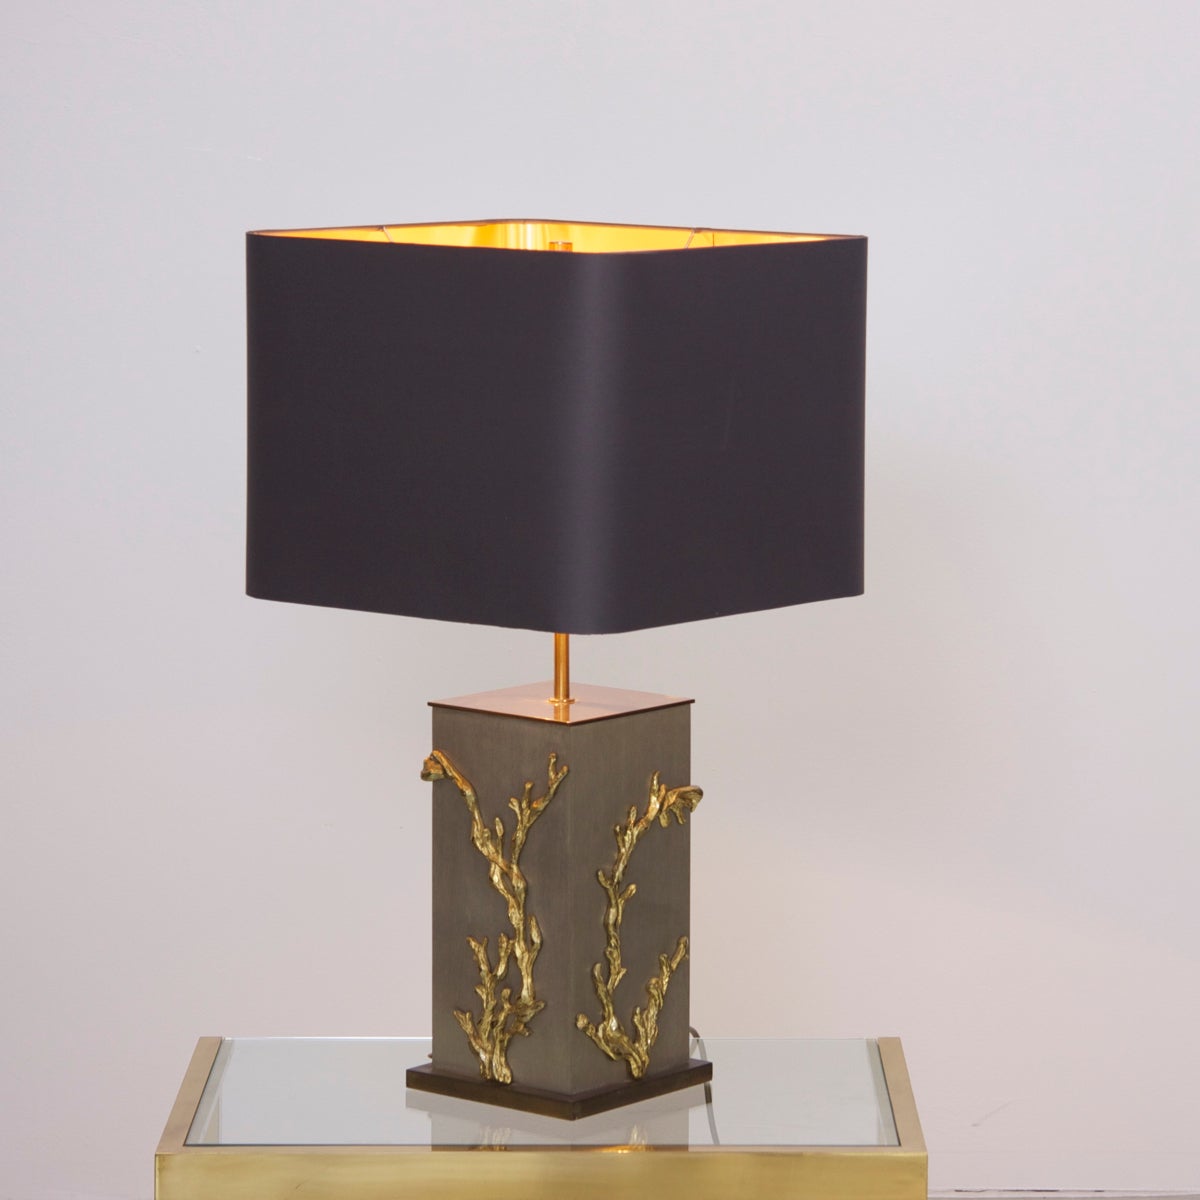 Very rare and elegant Maison Charles table lamp with massive bronze applications of algues or corails. The lamp is signed and has a very nice lamp shade, which is gold on the inside. So the light reflects in gold on the lamp and presents the lamp is